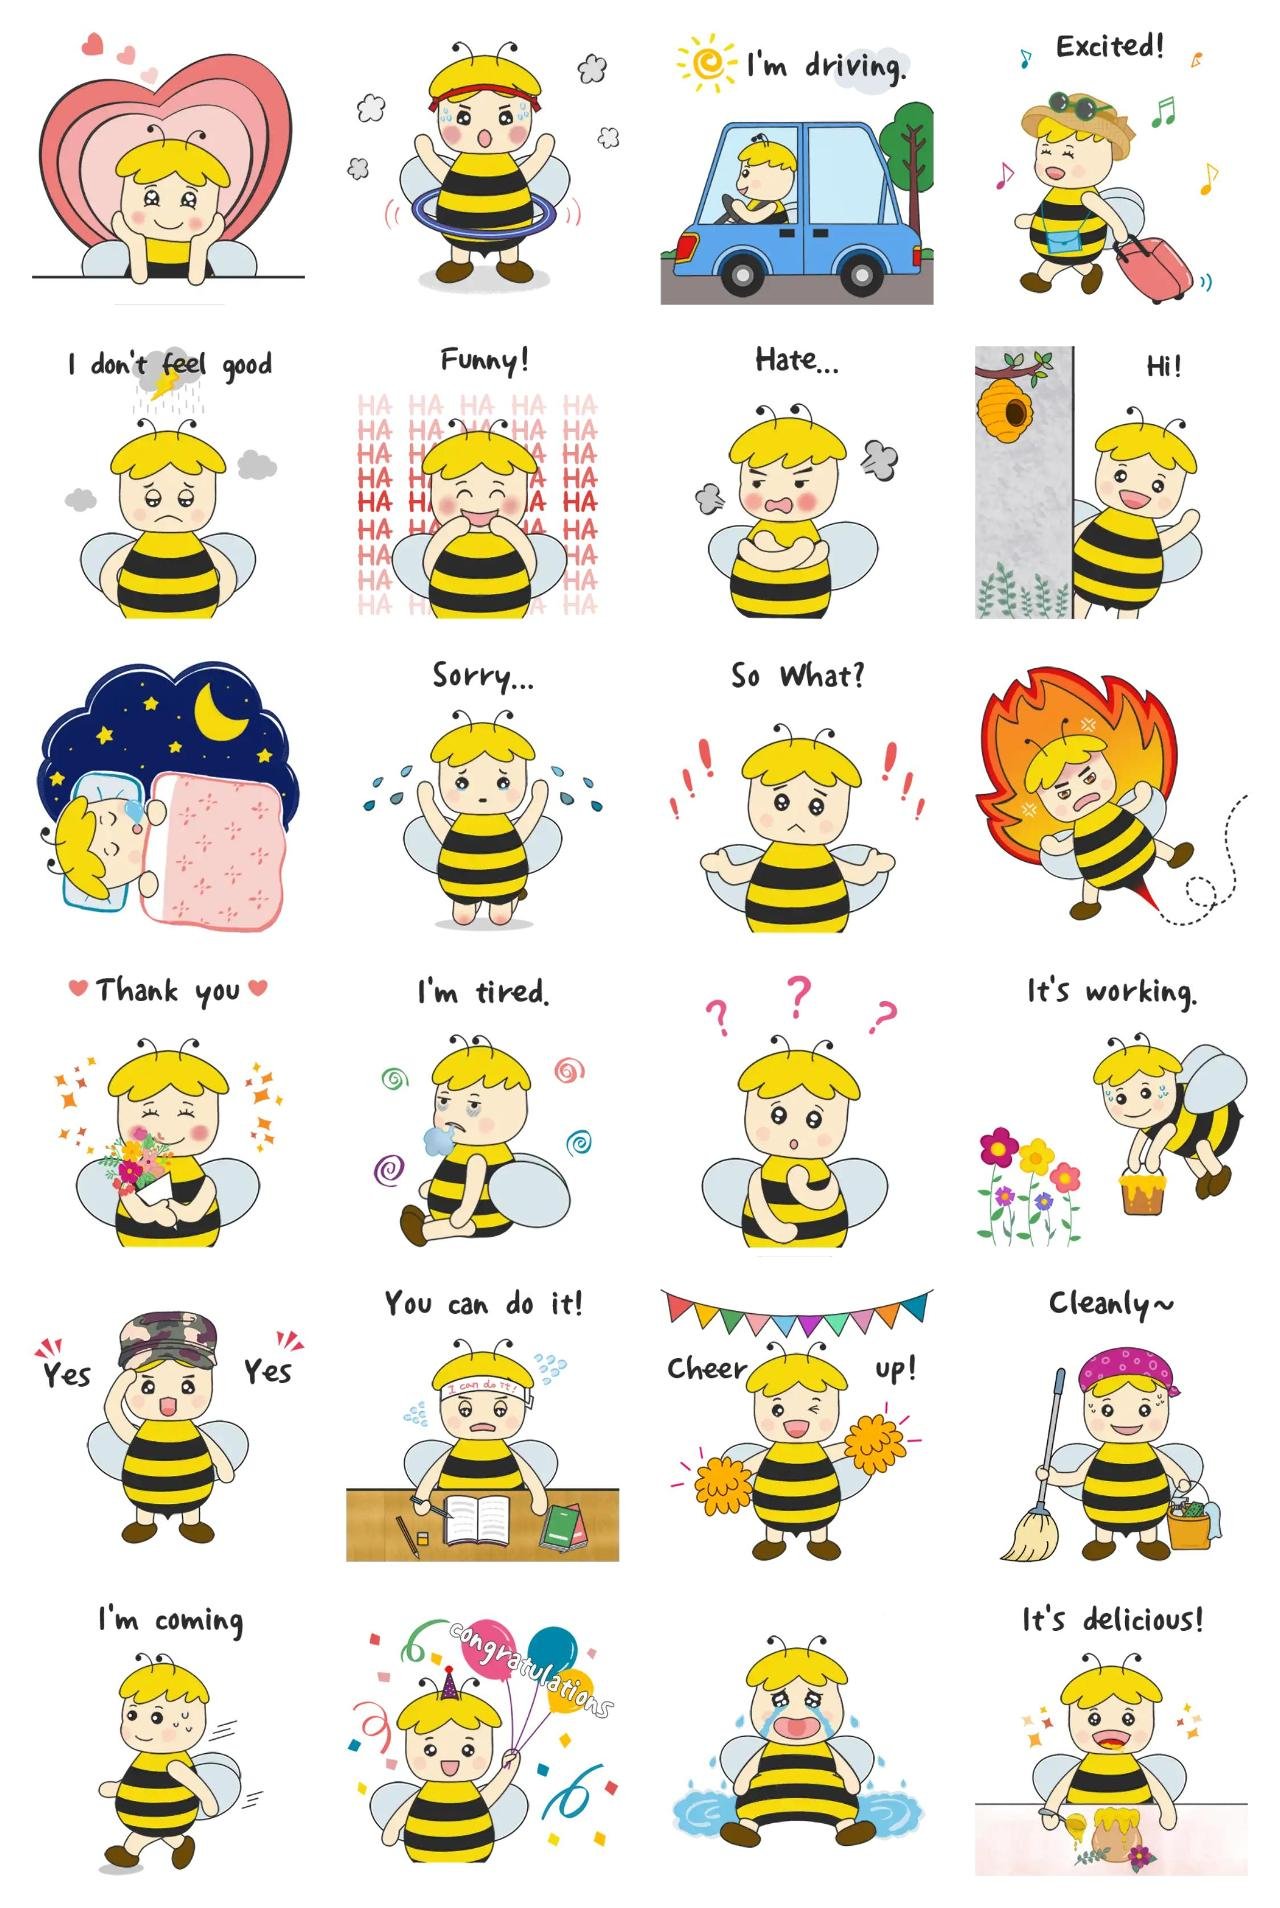 The daily life honeybee bibi. Animals sticker pack for Whatsapp, Telegram, Signal, and others chatting and message apps